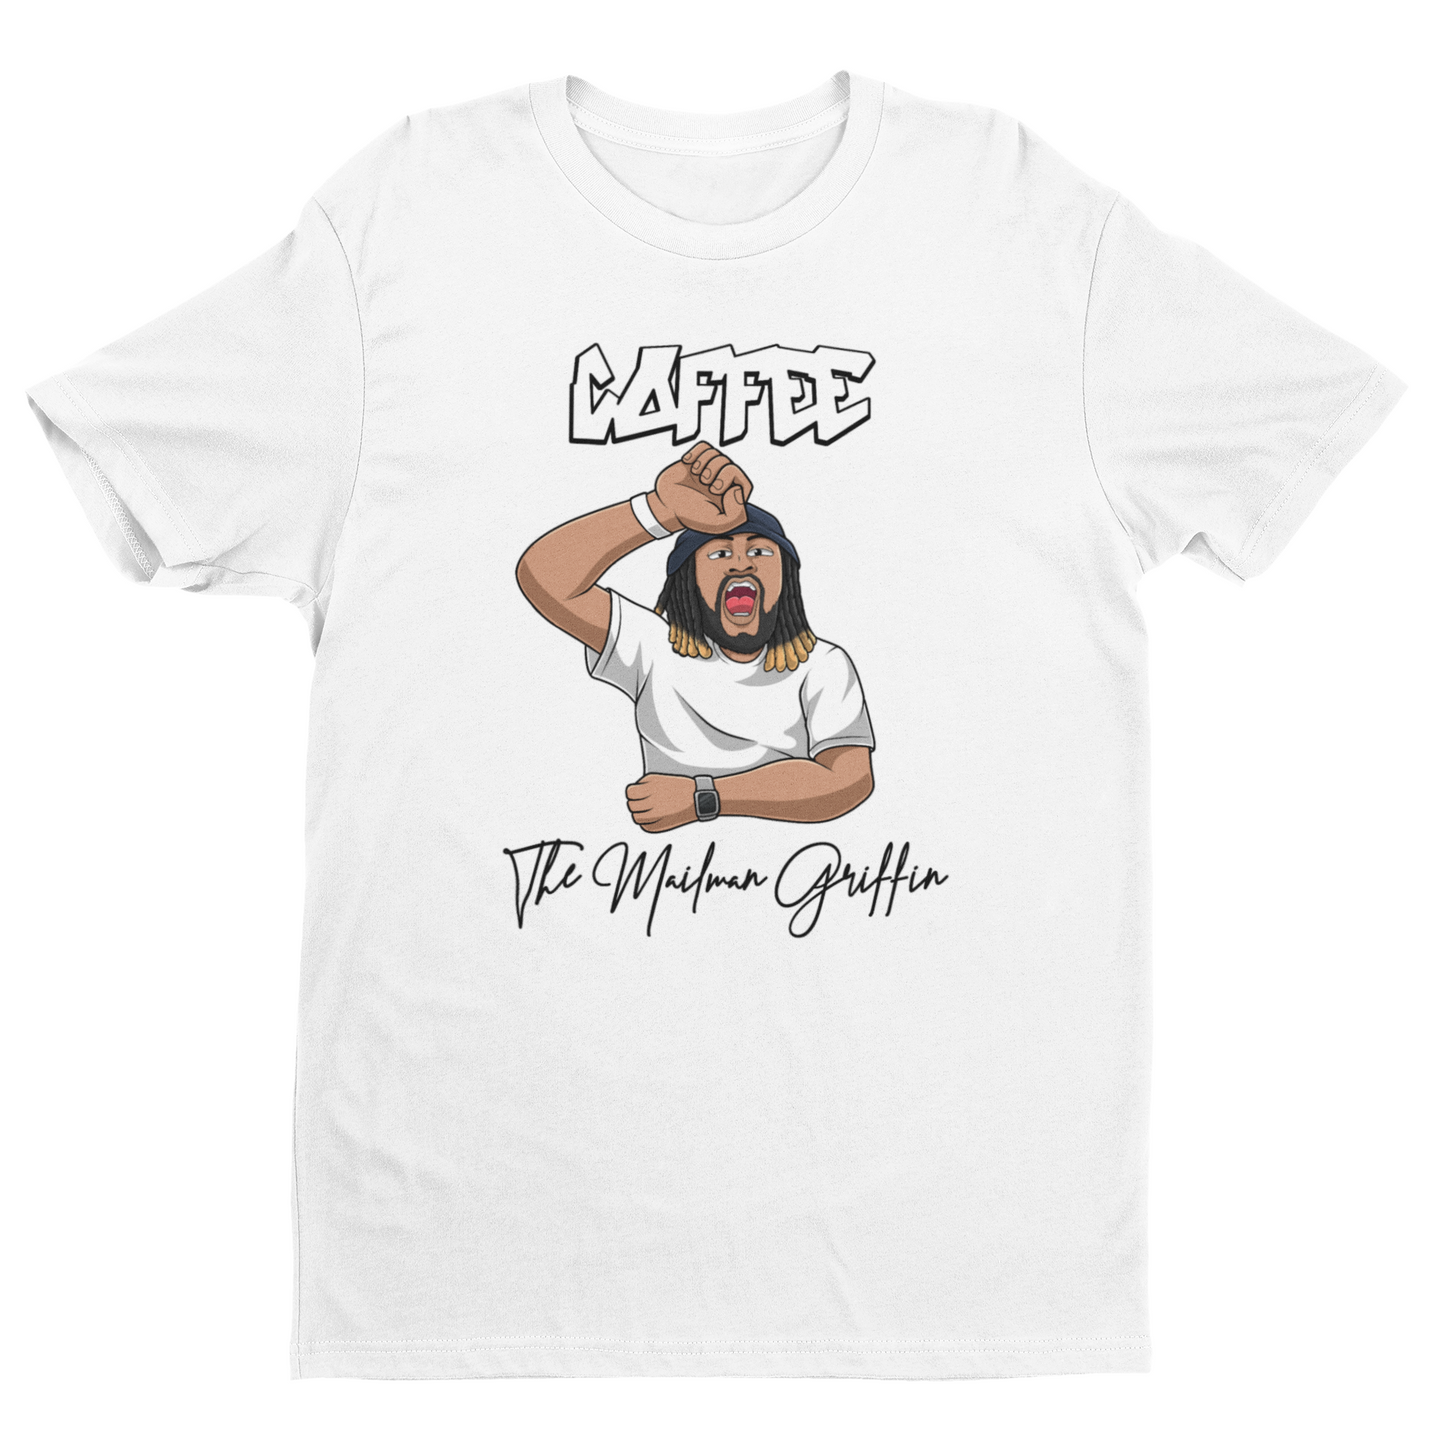 Coffee Griffin T-Shirt